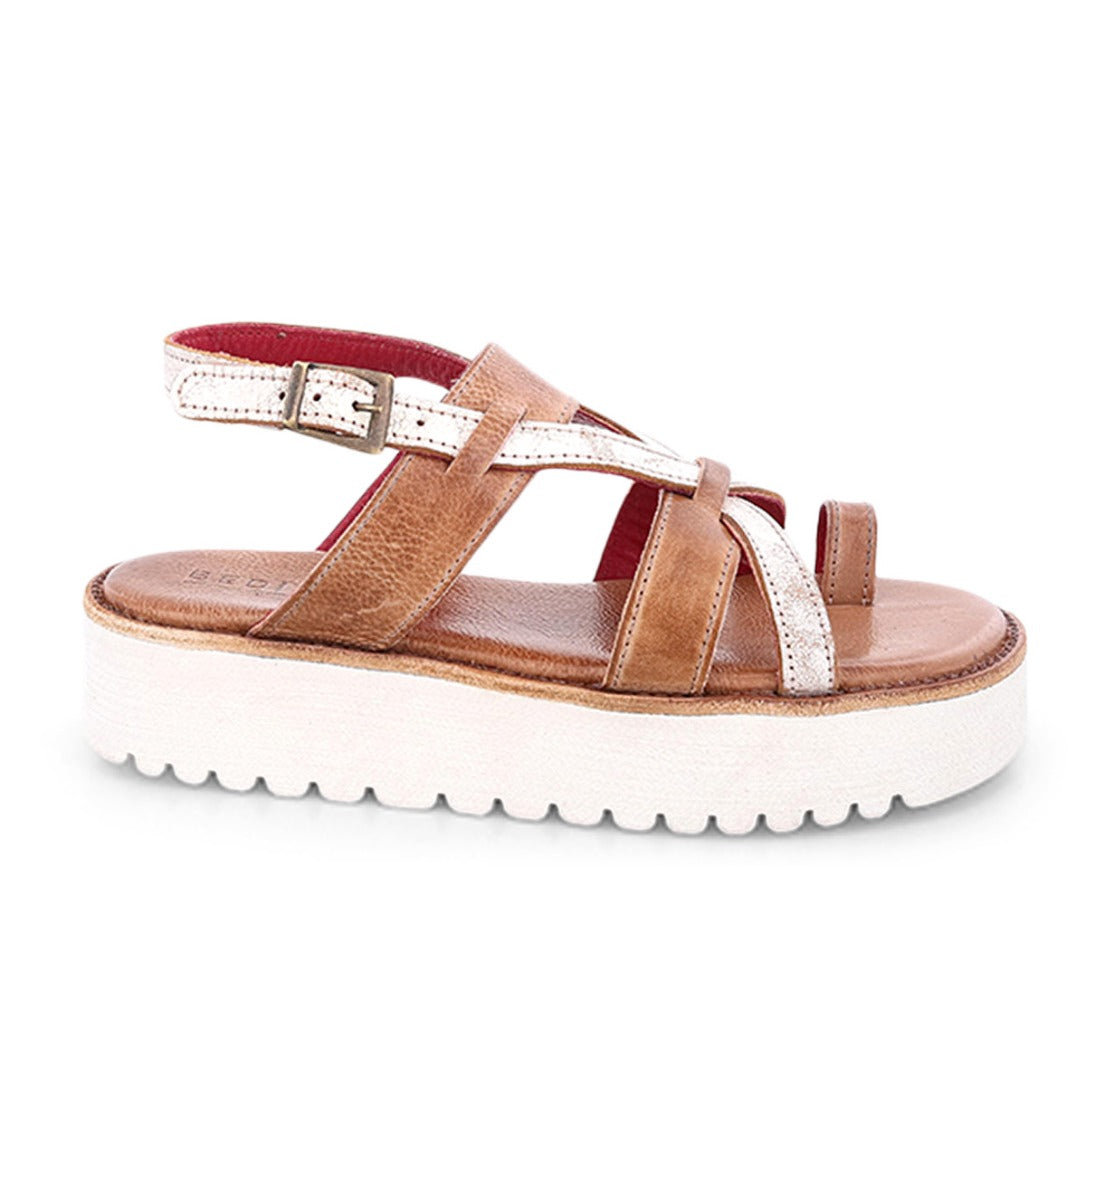 A Bed Stu women's Crawler sandal in tan with white straps.